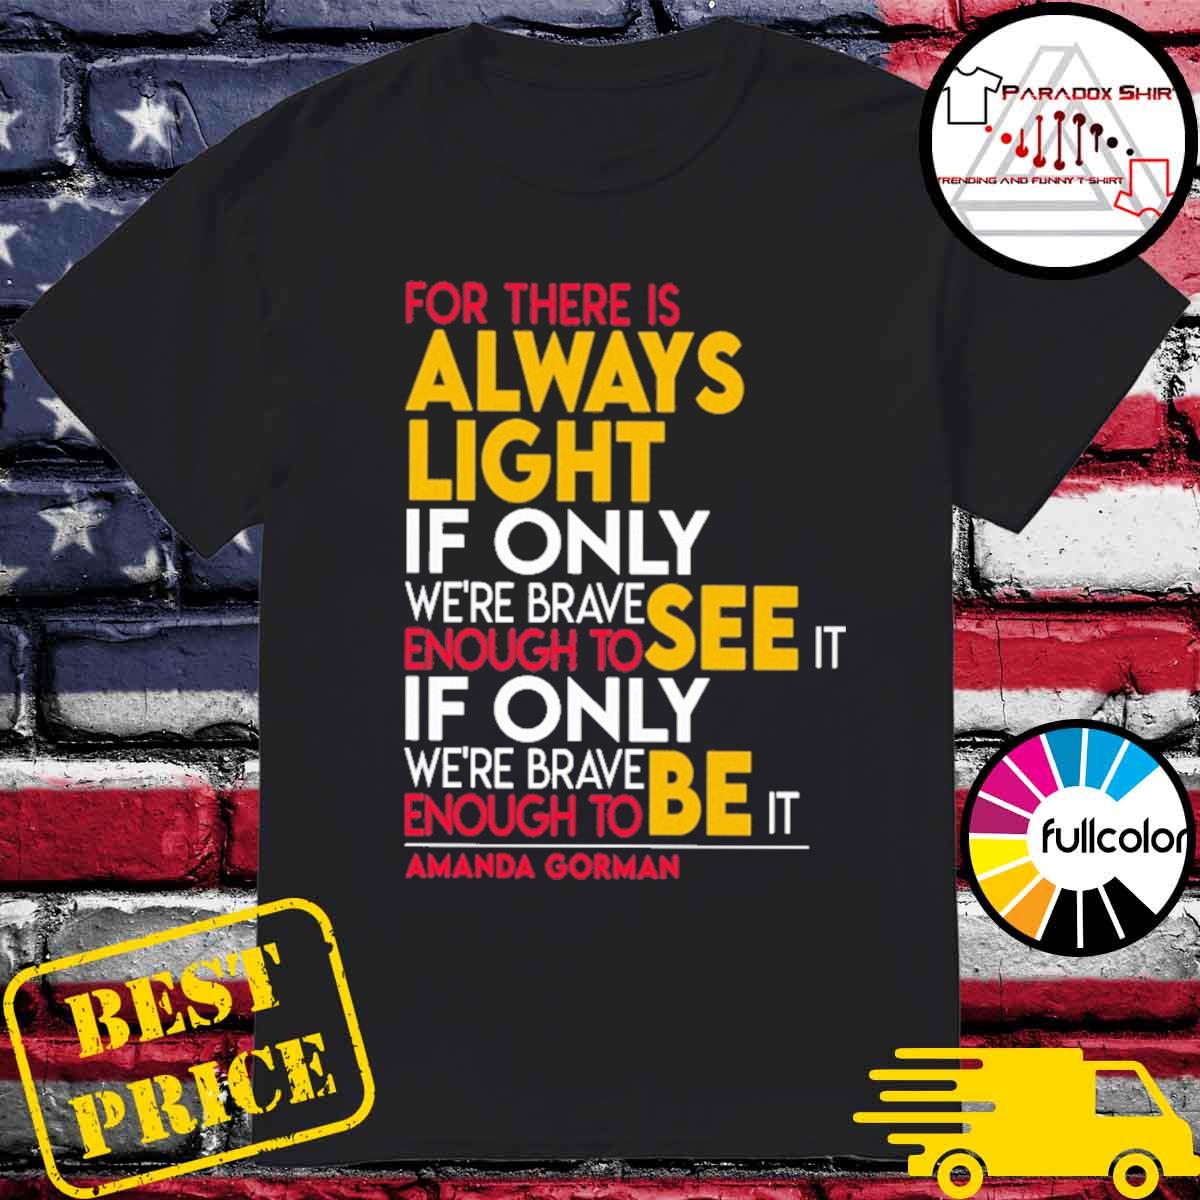 For There Is Always Light If Only Were Brave Enough To See It If Only Were Brave Enough To Be It Amanda Gorman Shirt Hoodie Sweater Long Sleeve And Tank Top